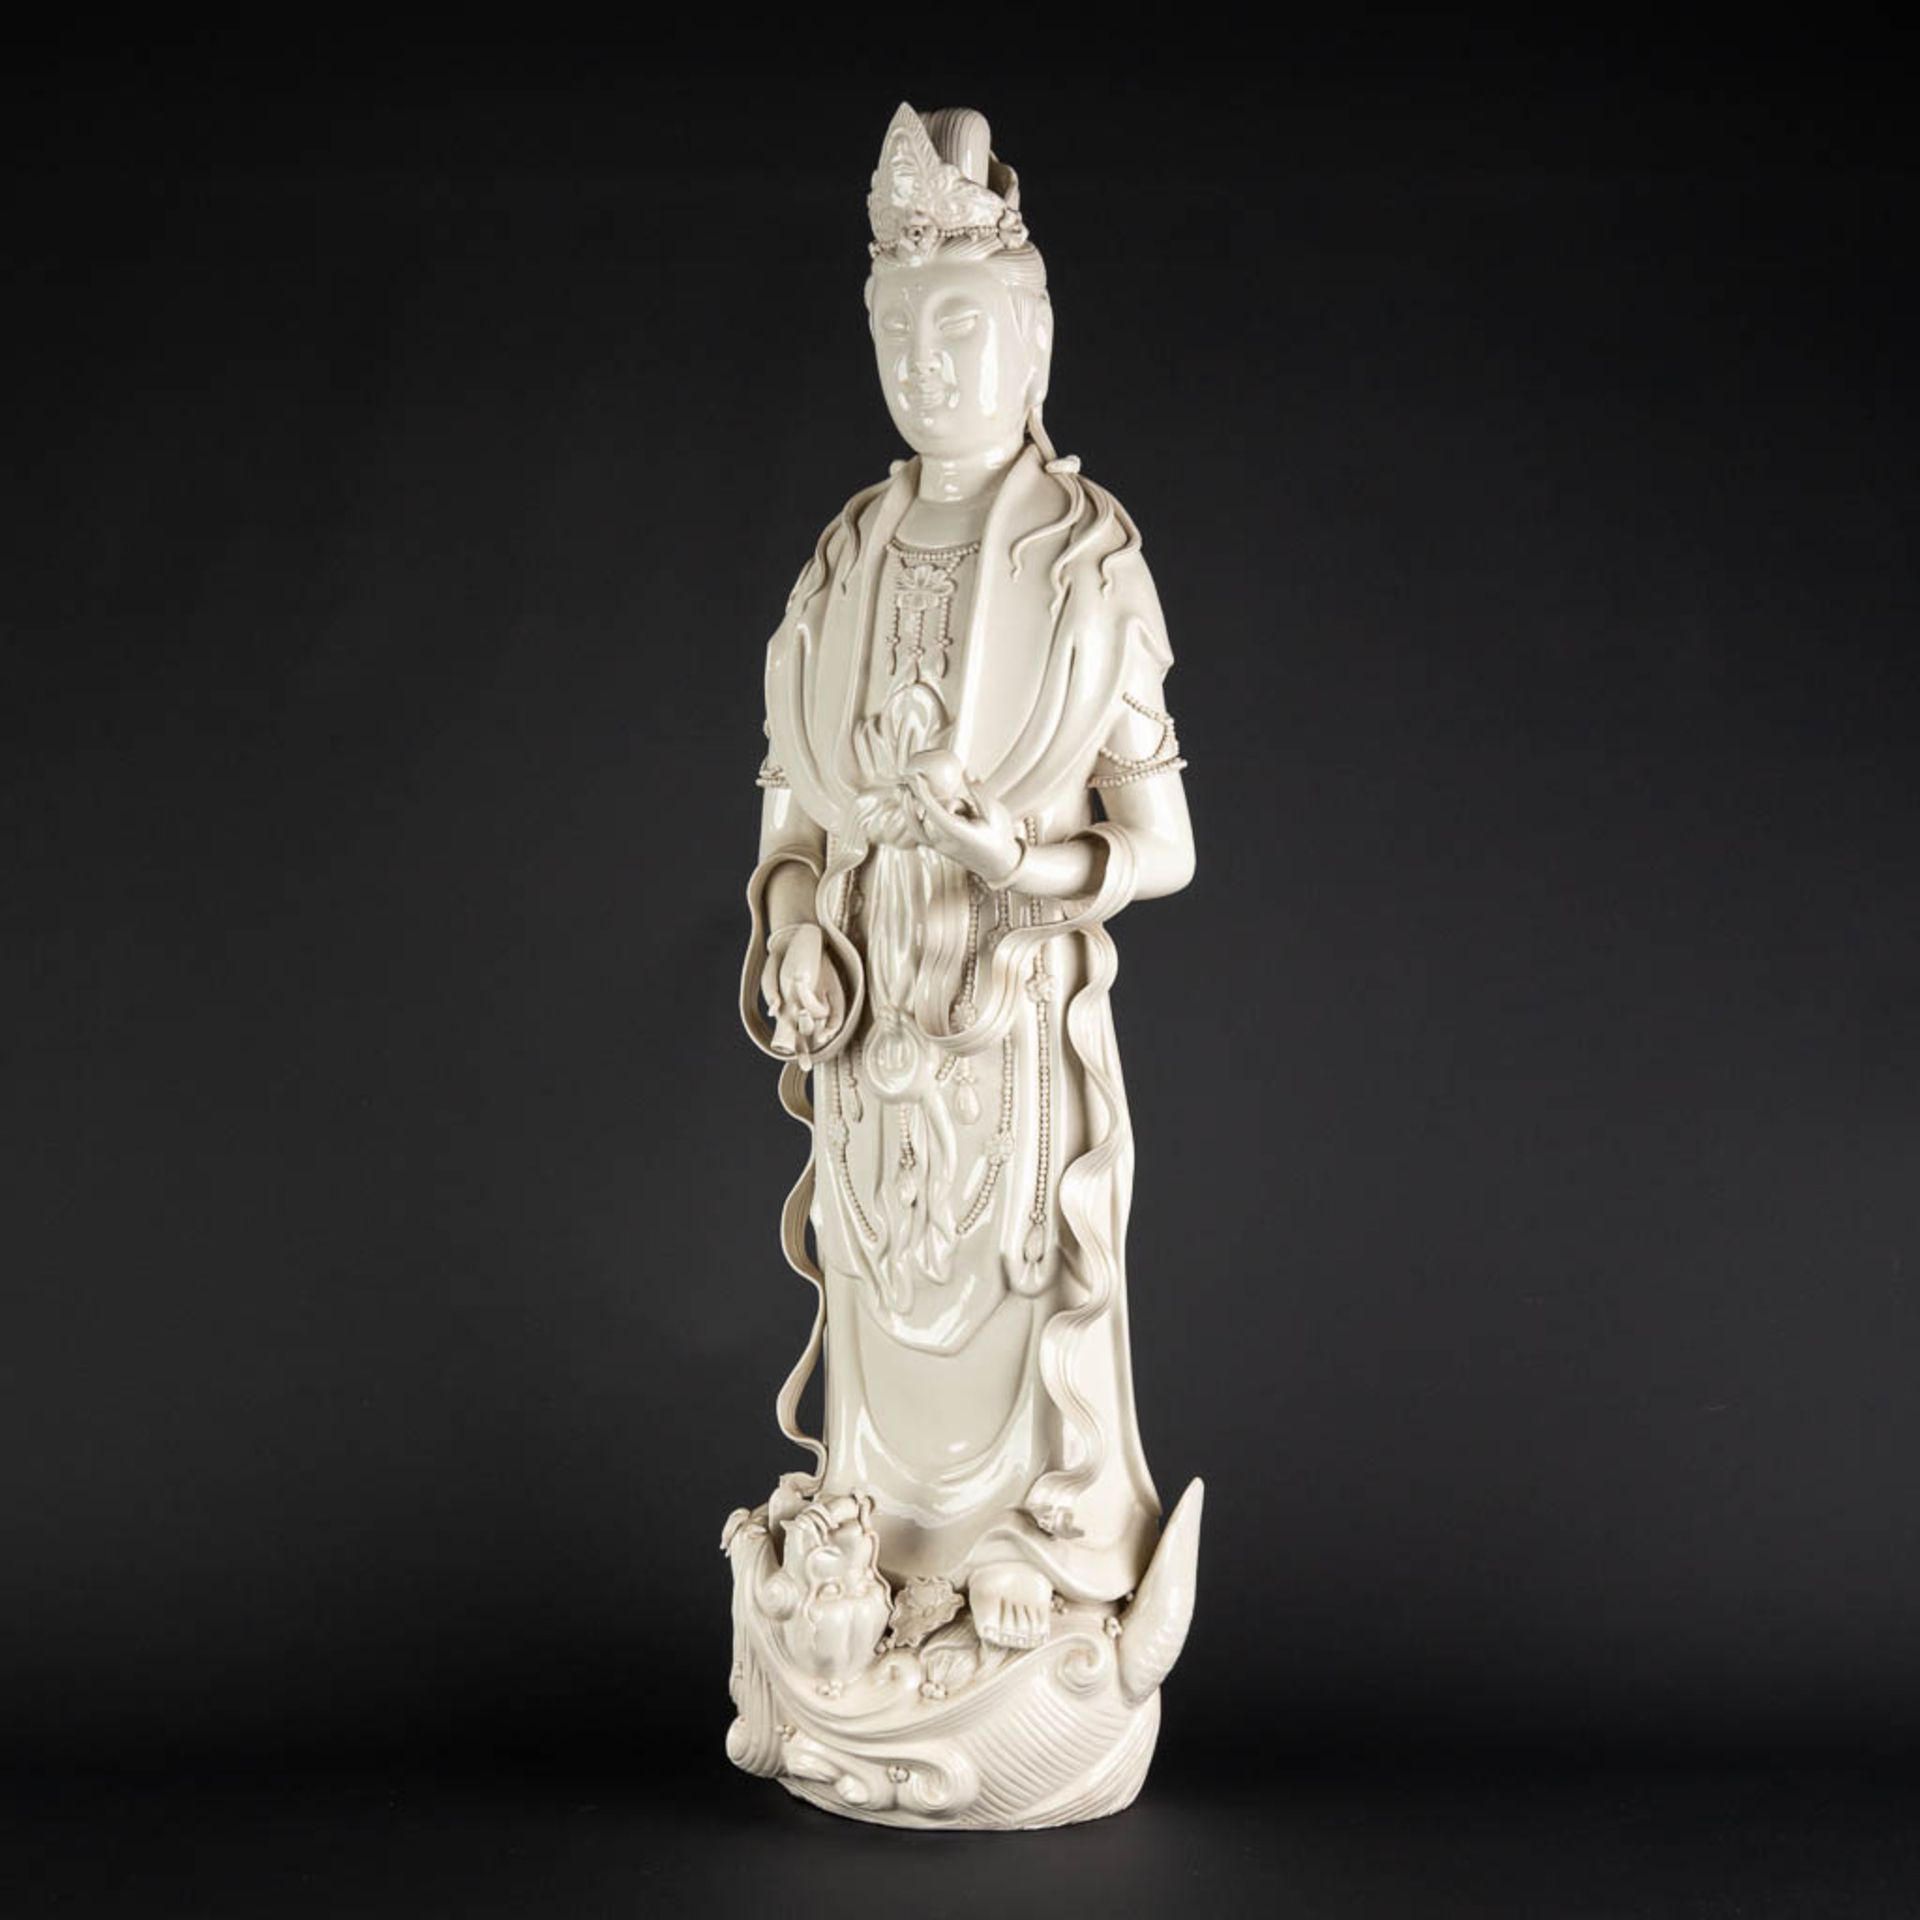 A large Chinese Guanyin figurine, blanc de chine porcelain. 20th C. (D:20 x W:23 x H:80 cm) - Image 3 of 13